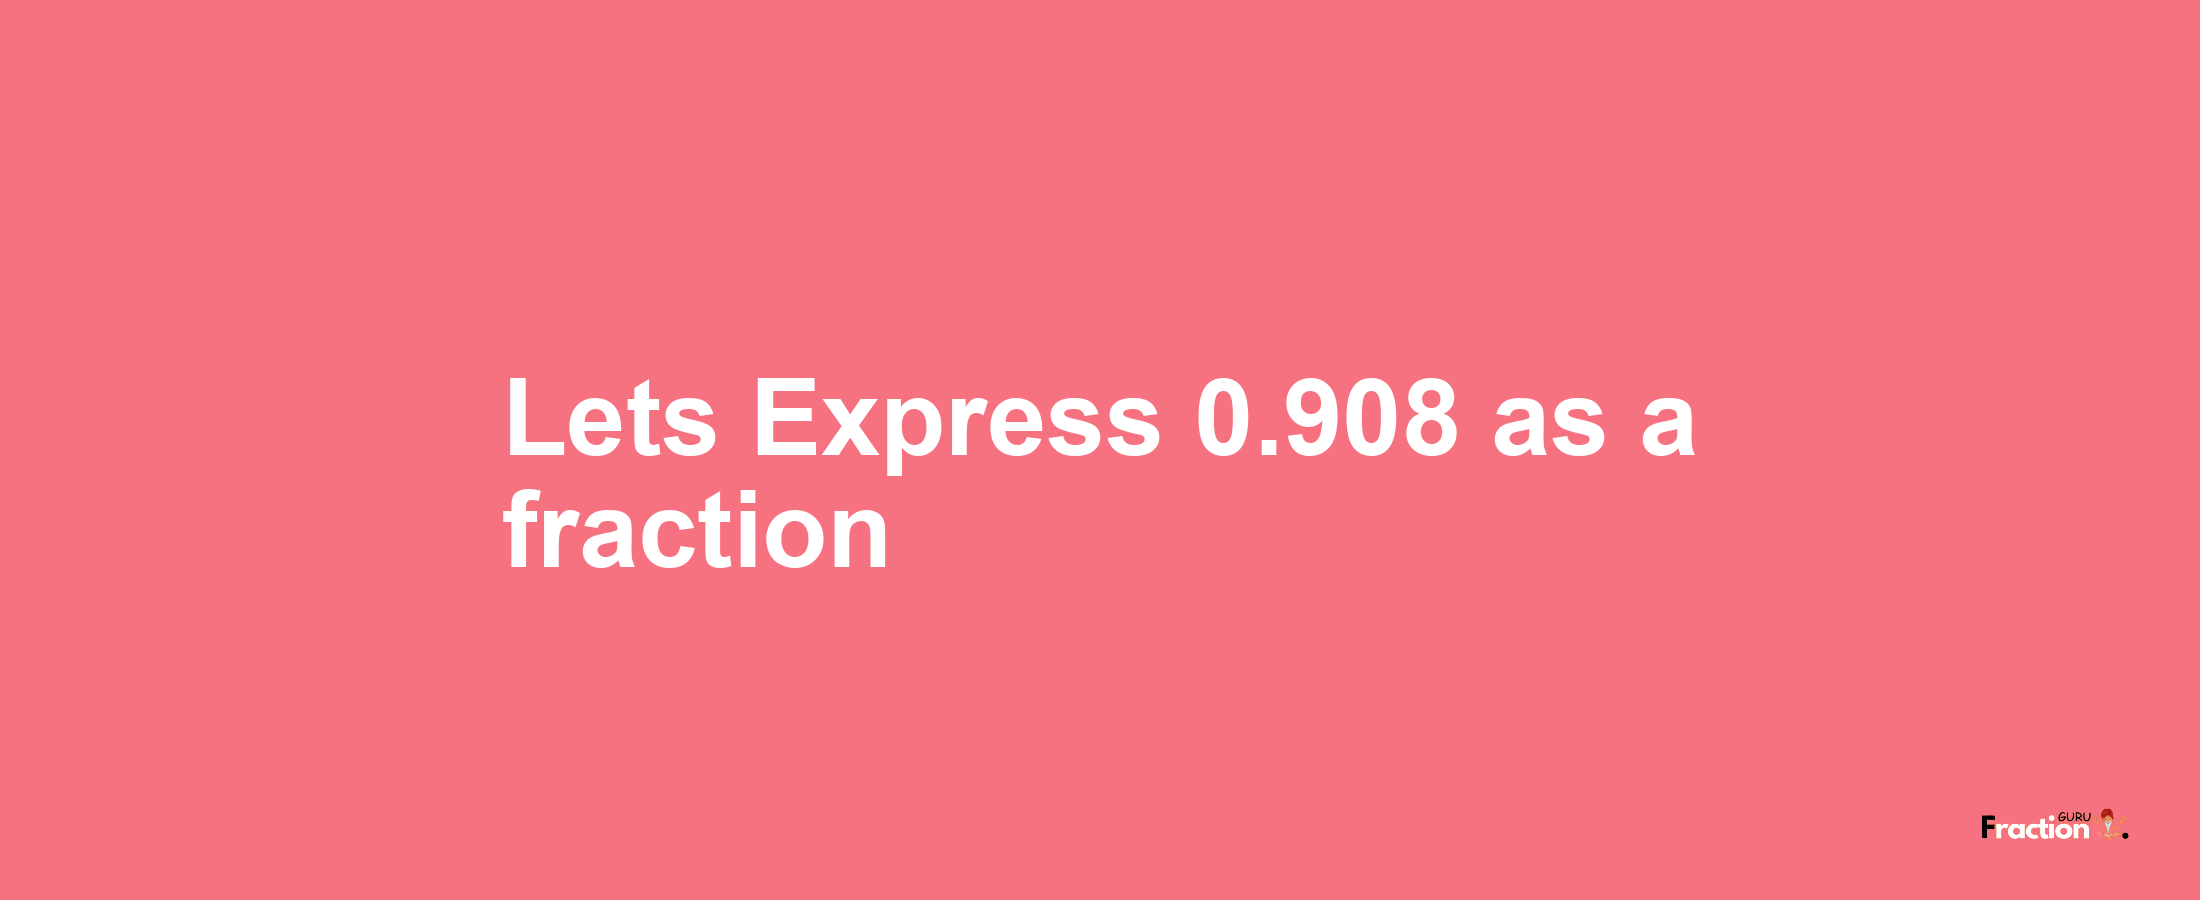 Lets Express 0.908 as afraction